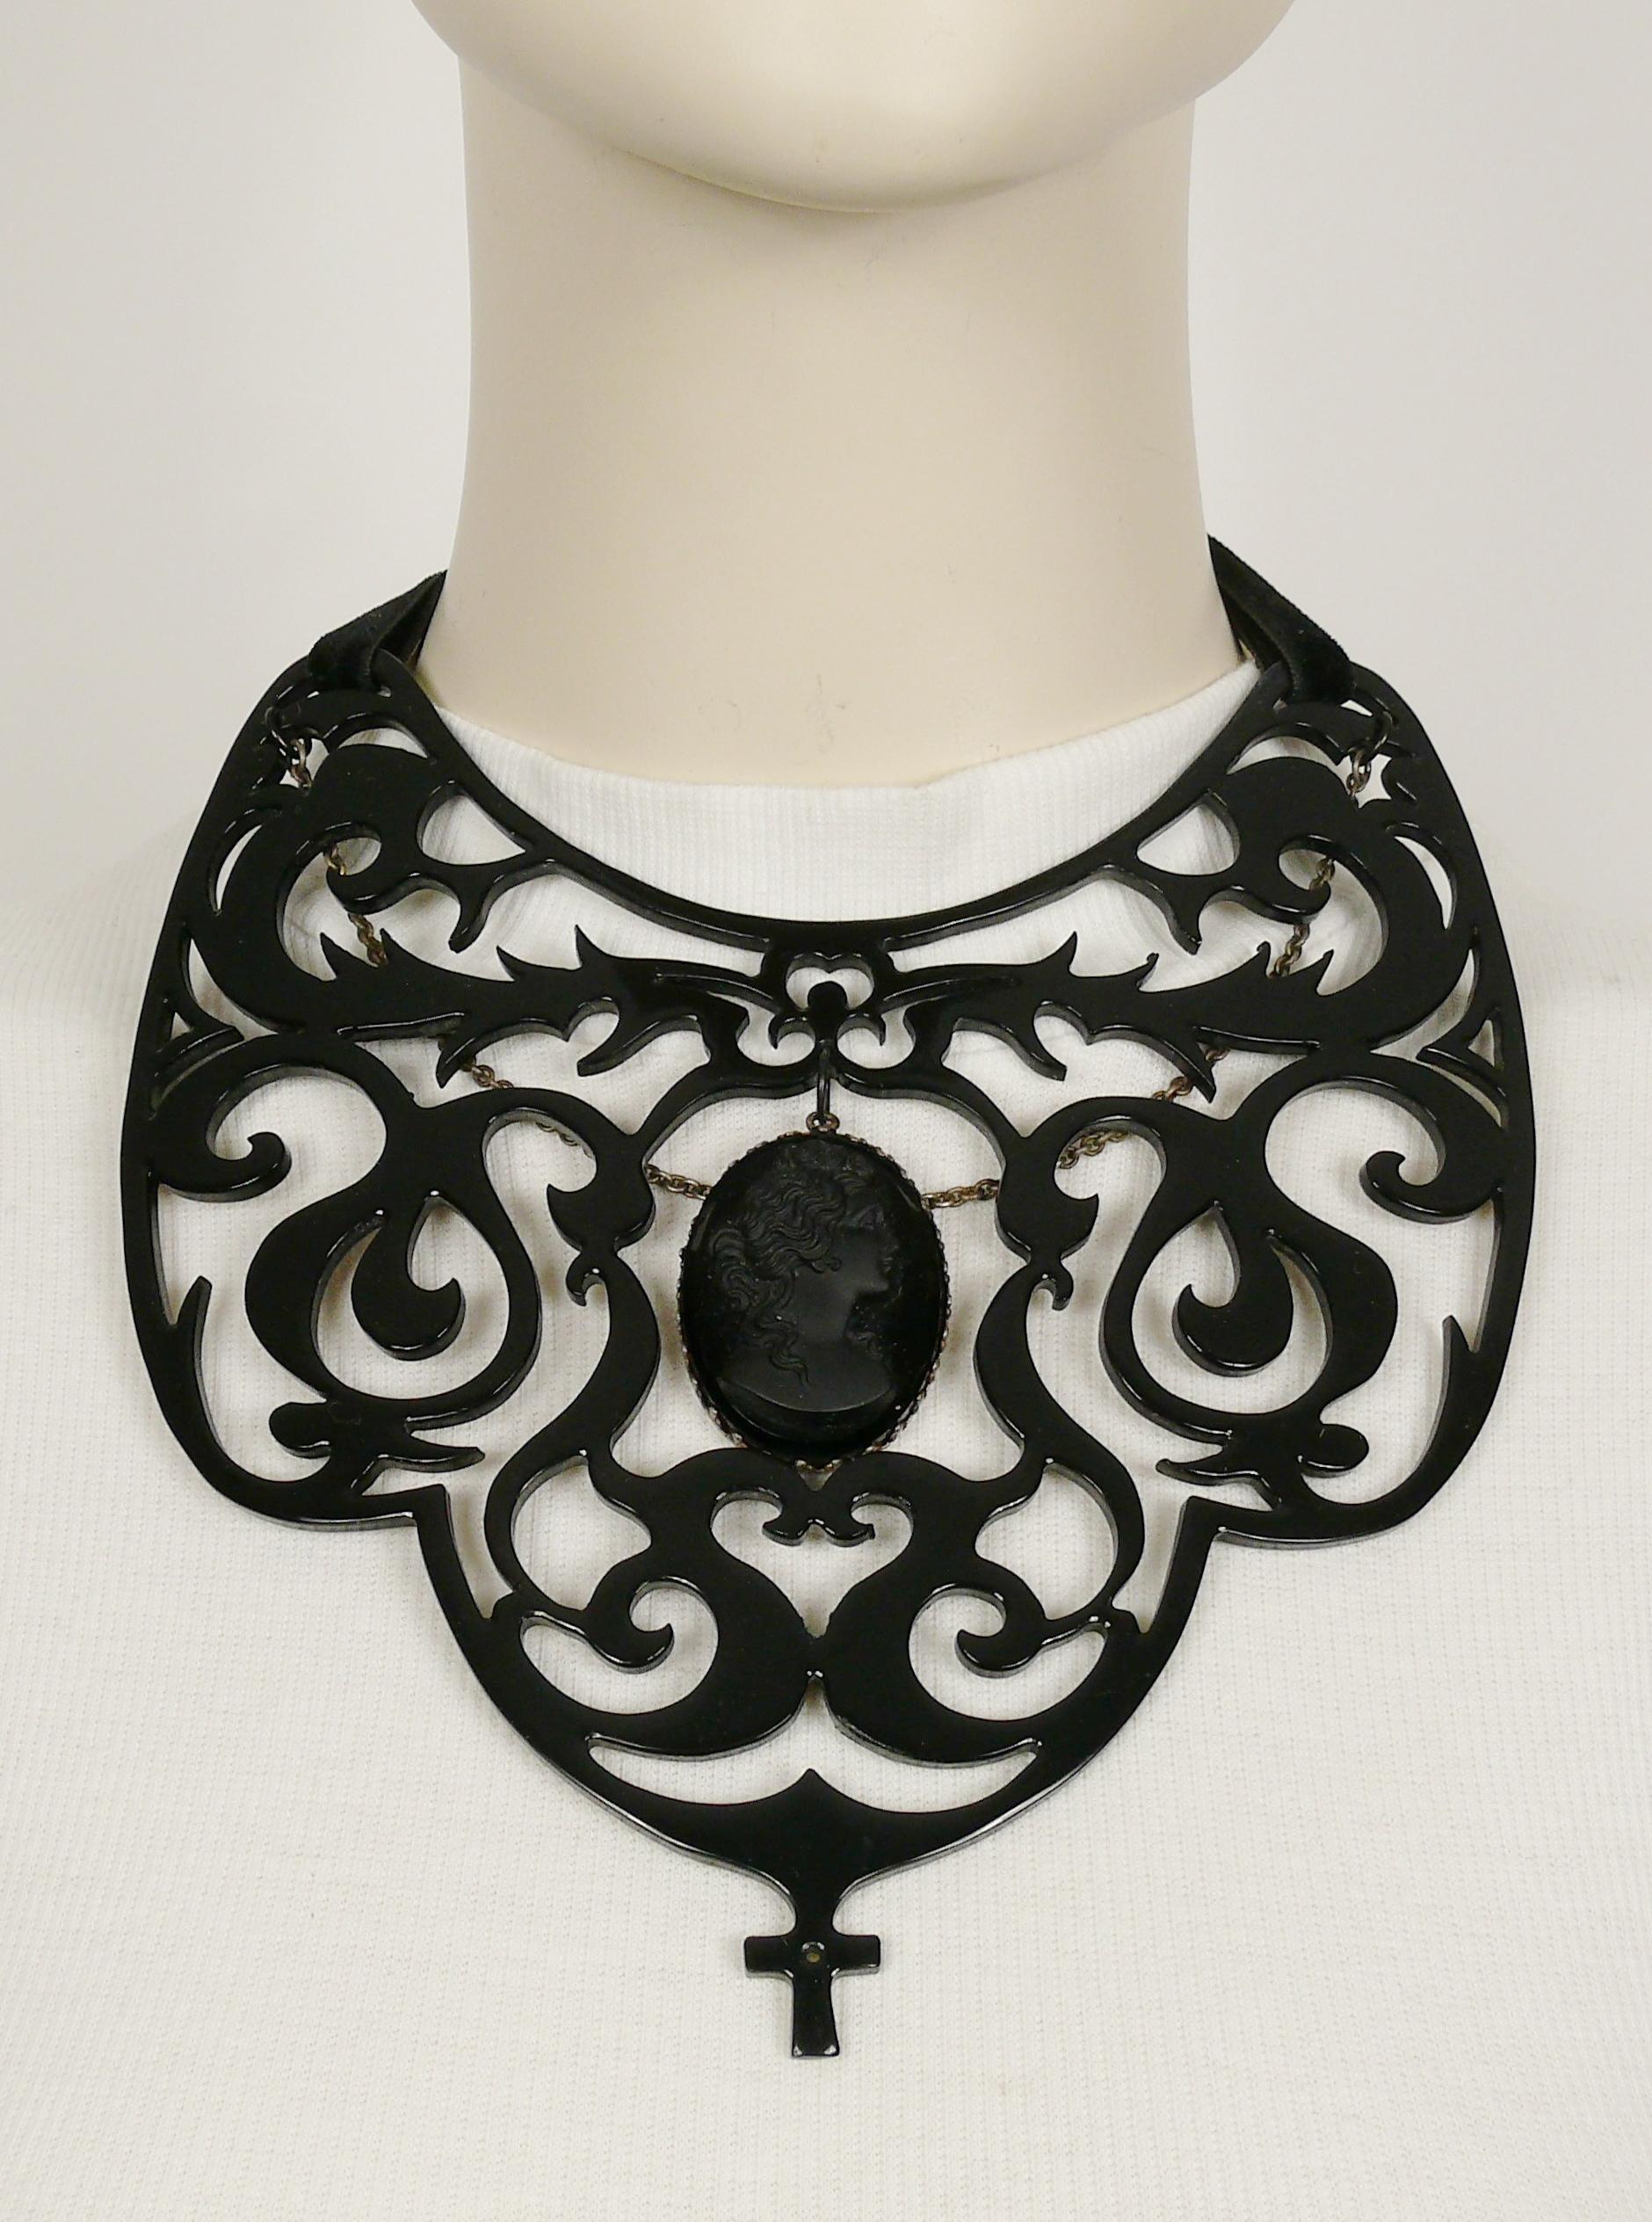 JEAN PAUL GAULTIER vintage black resin openwork Gothic Victorian inspired bib necklace featuring a woman profile glass cameo pendant and a chain.

A variant of this bib necklace was worn by MADONNA in the video clip FROZEN (see photo 6).

Velvet